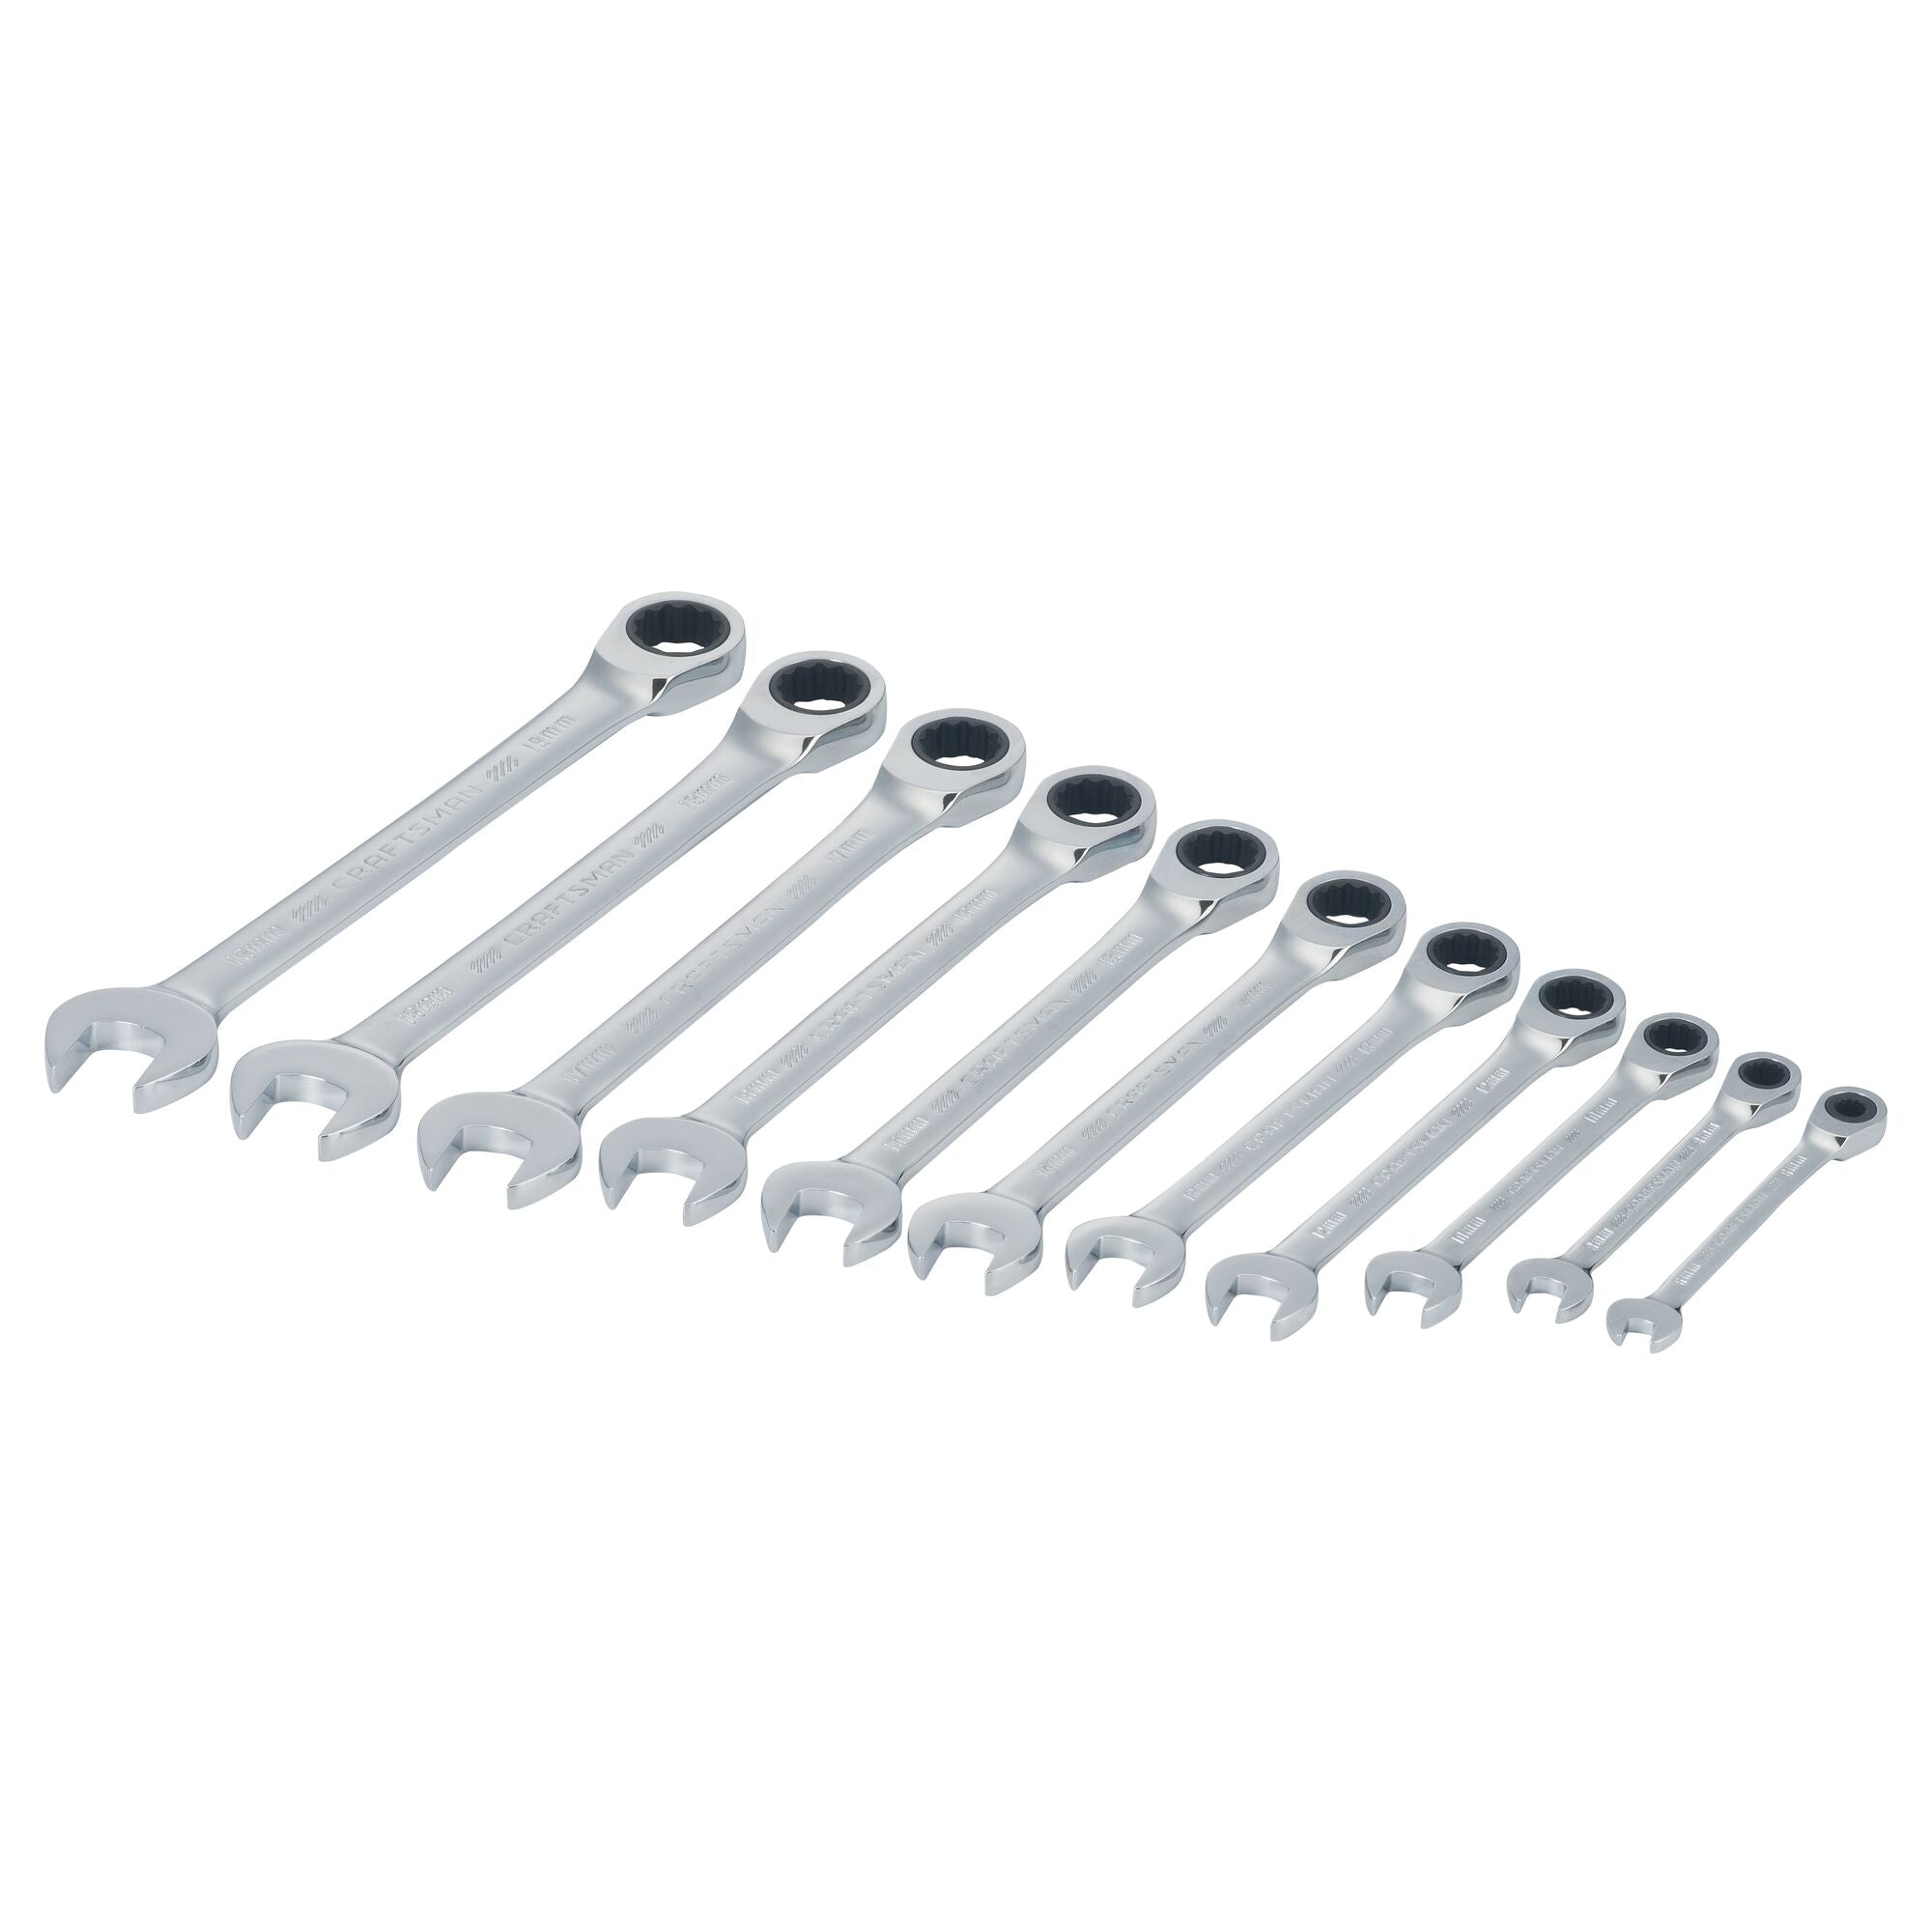 Metric Ratcheting Combination Wrench Set (11 pc) | CRAFTSMAN